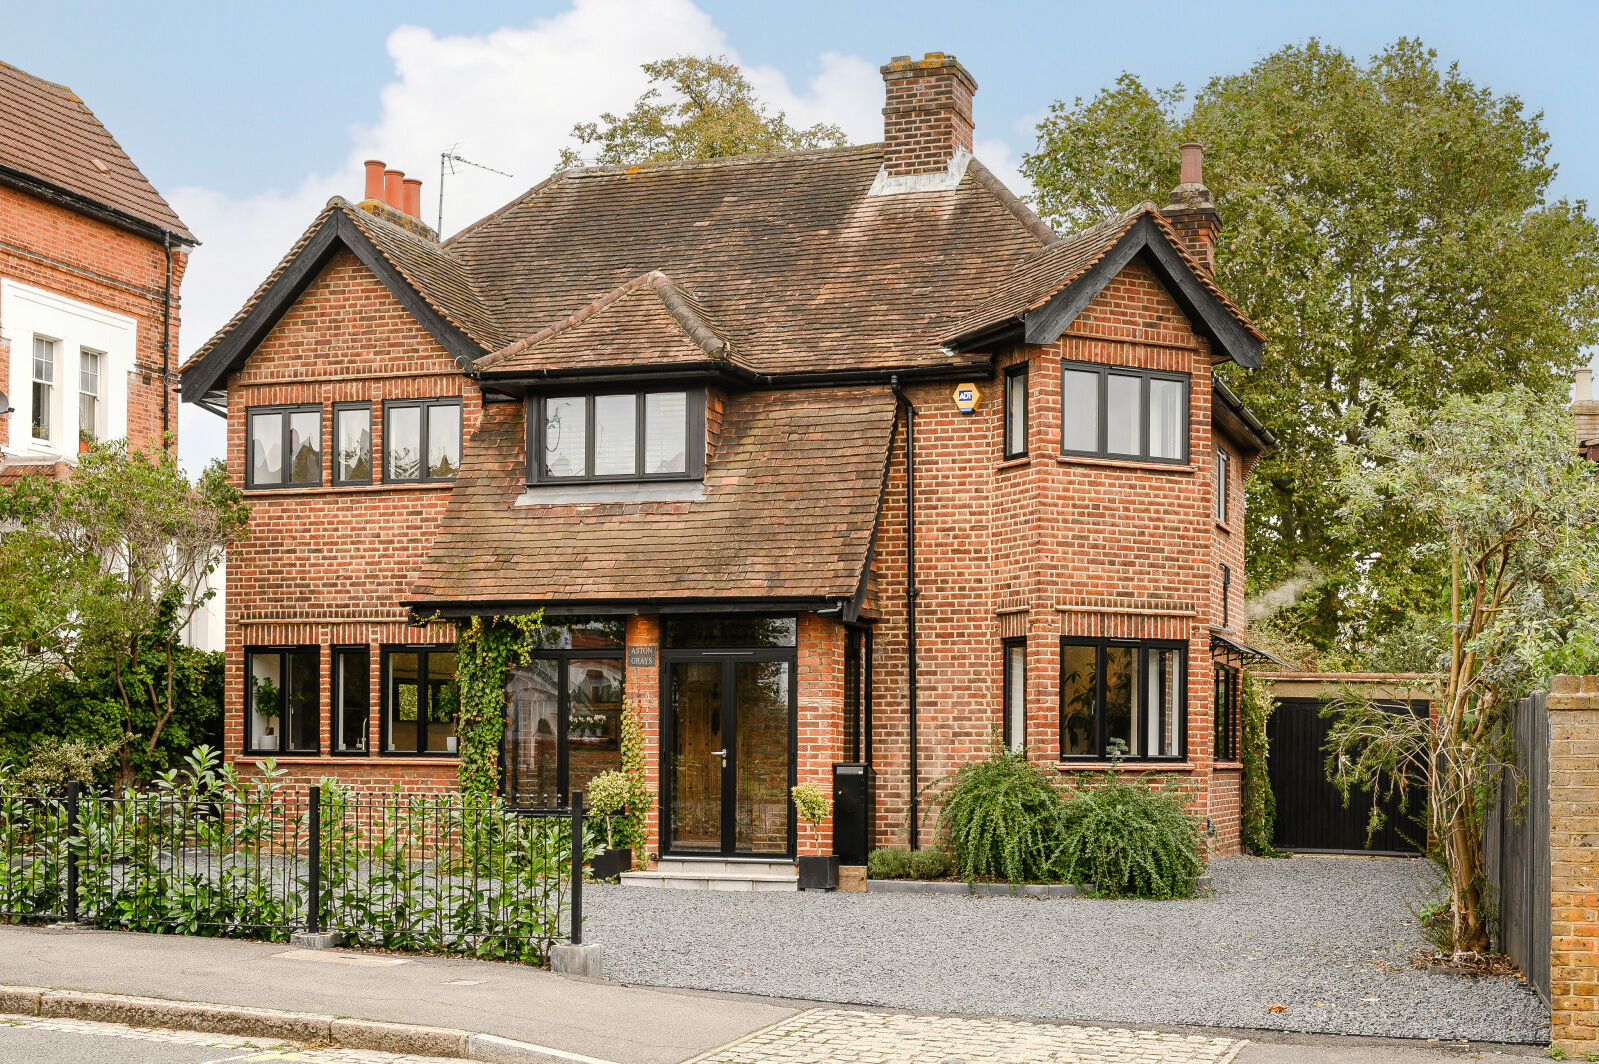 4 bedroom detached house for sale Arterberry Road, London, SW20, main image